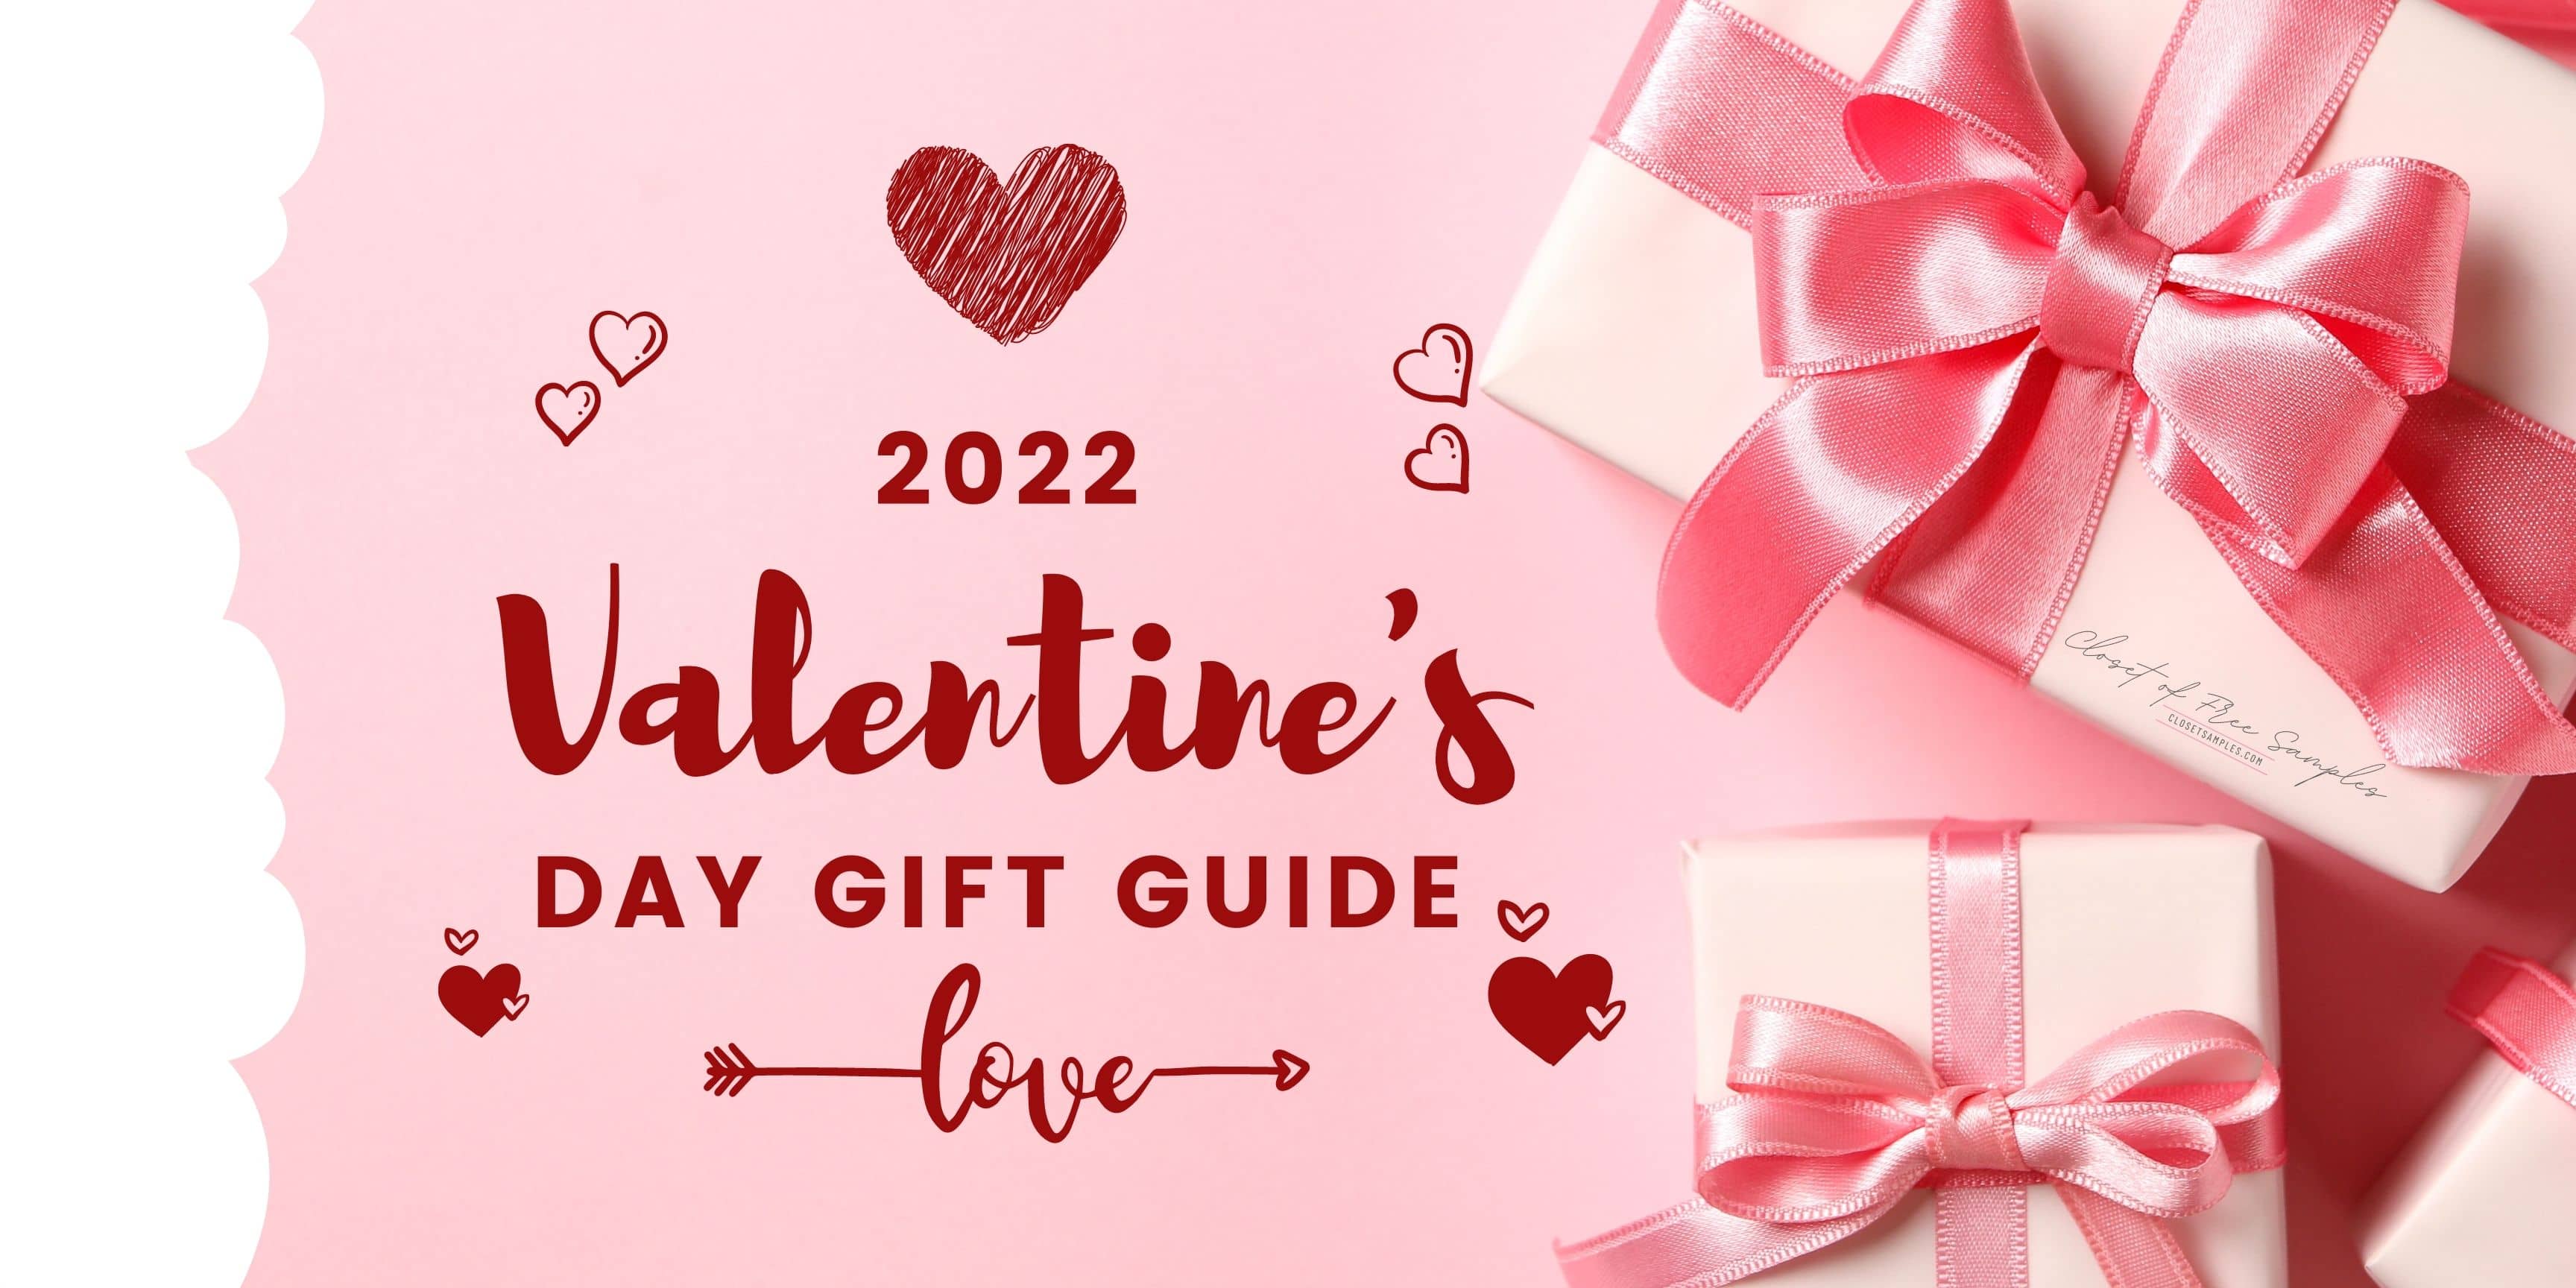 The Best Gift Ideas for Valentine's Day 2022!